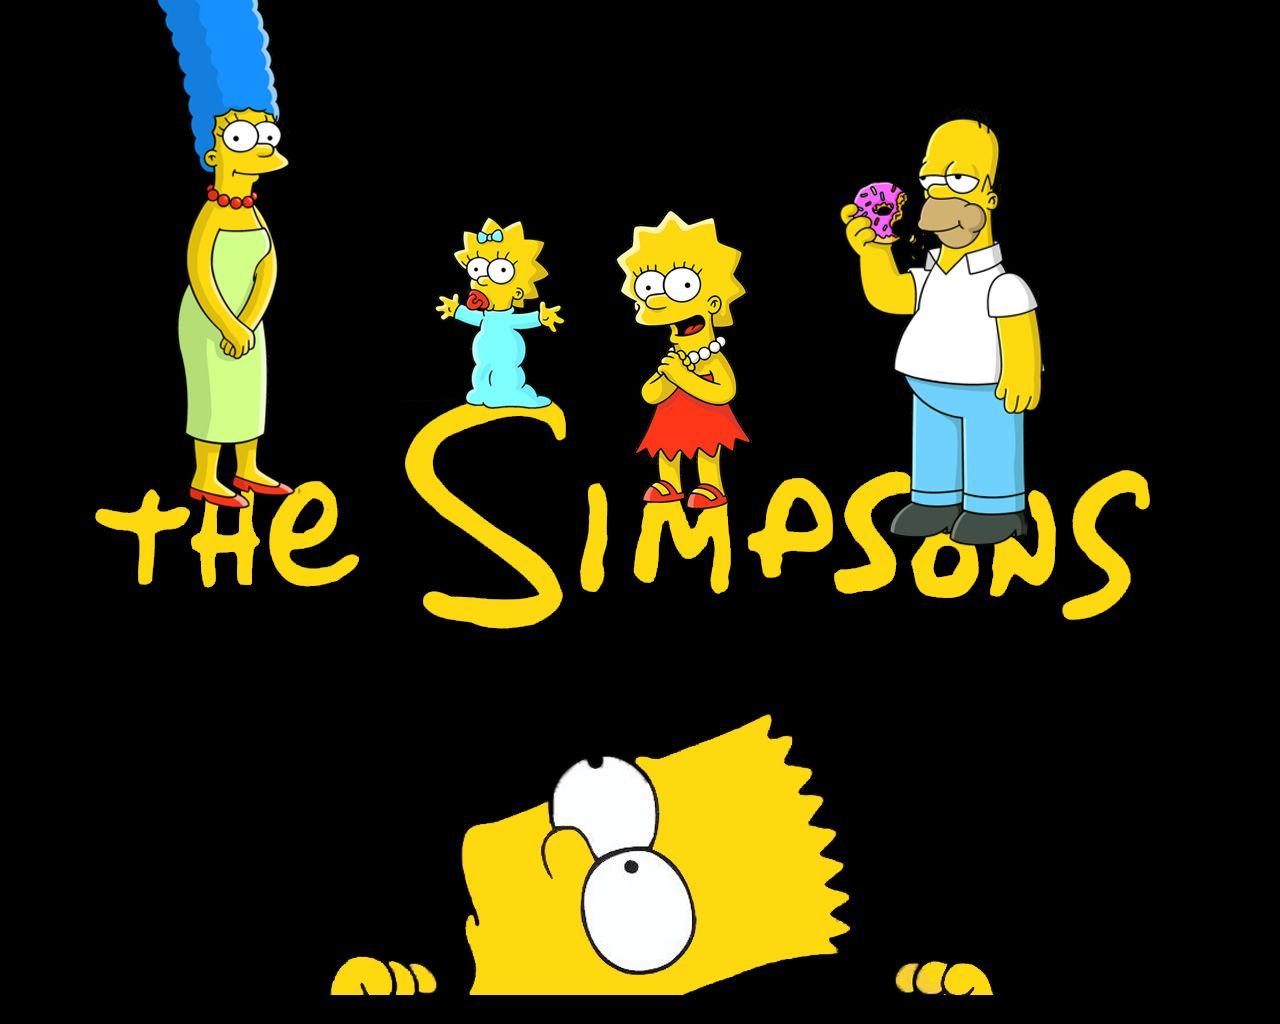 Simpsons Characters Wallpapers - Wallpaper Cave